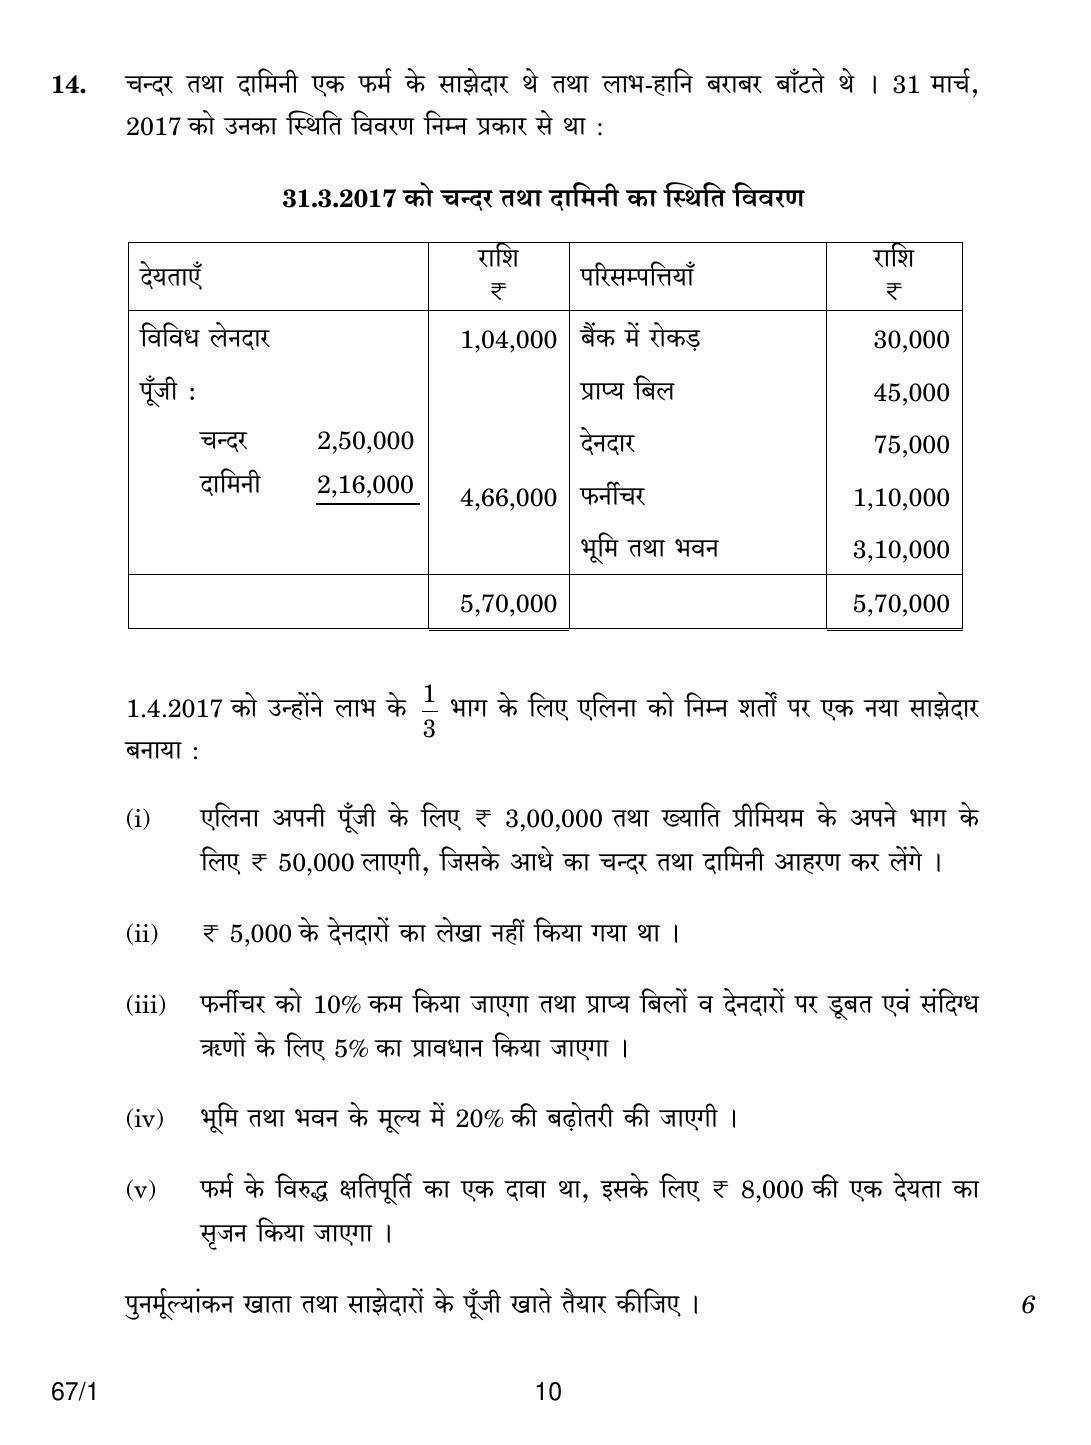 CBSE Class 12 67-1 ACCOUNTANCY 2018 Question Paper - Page 10